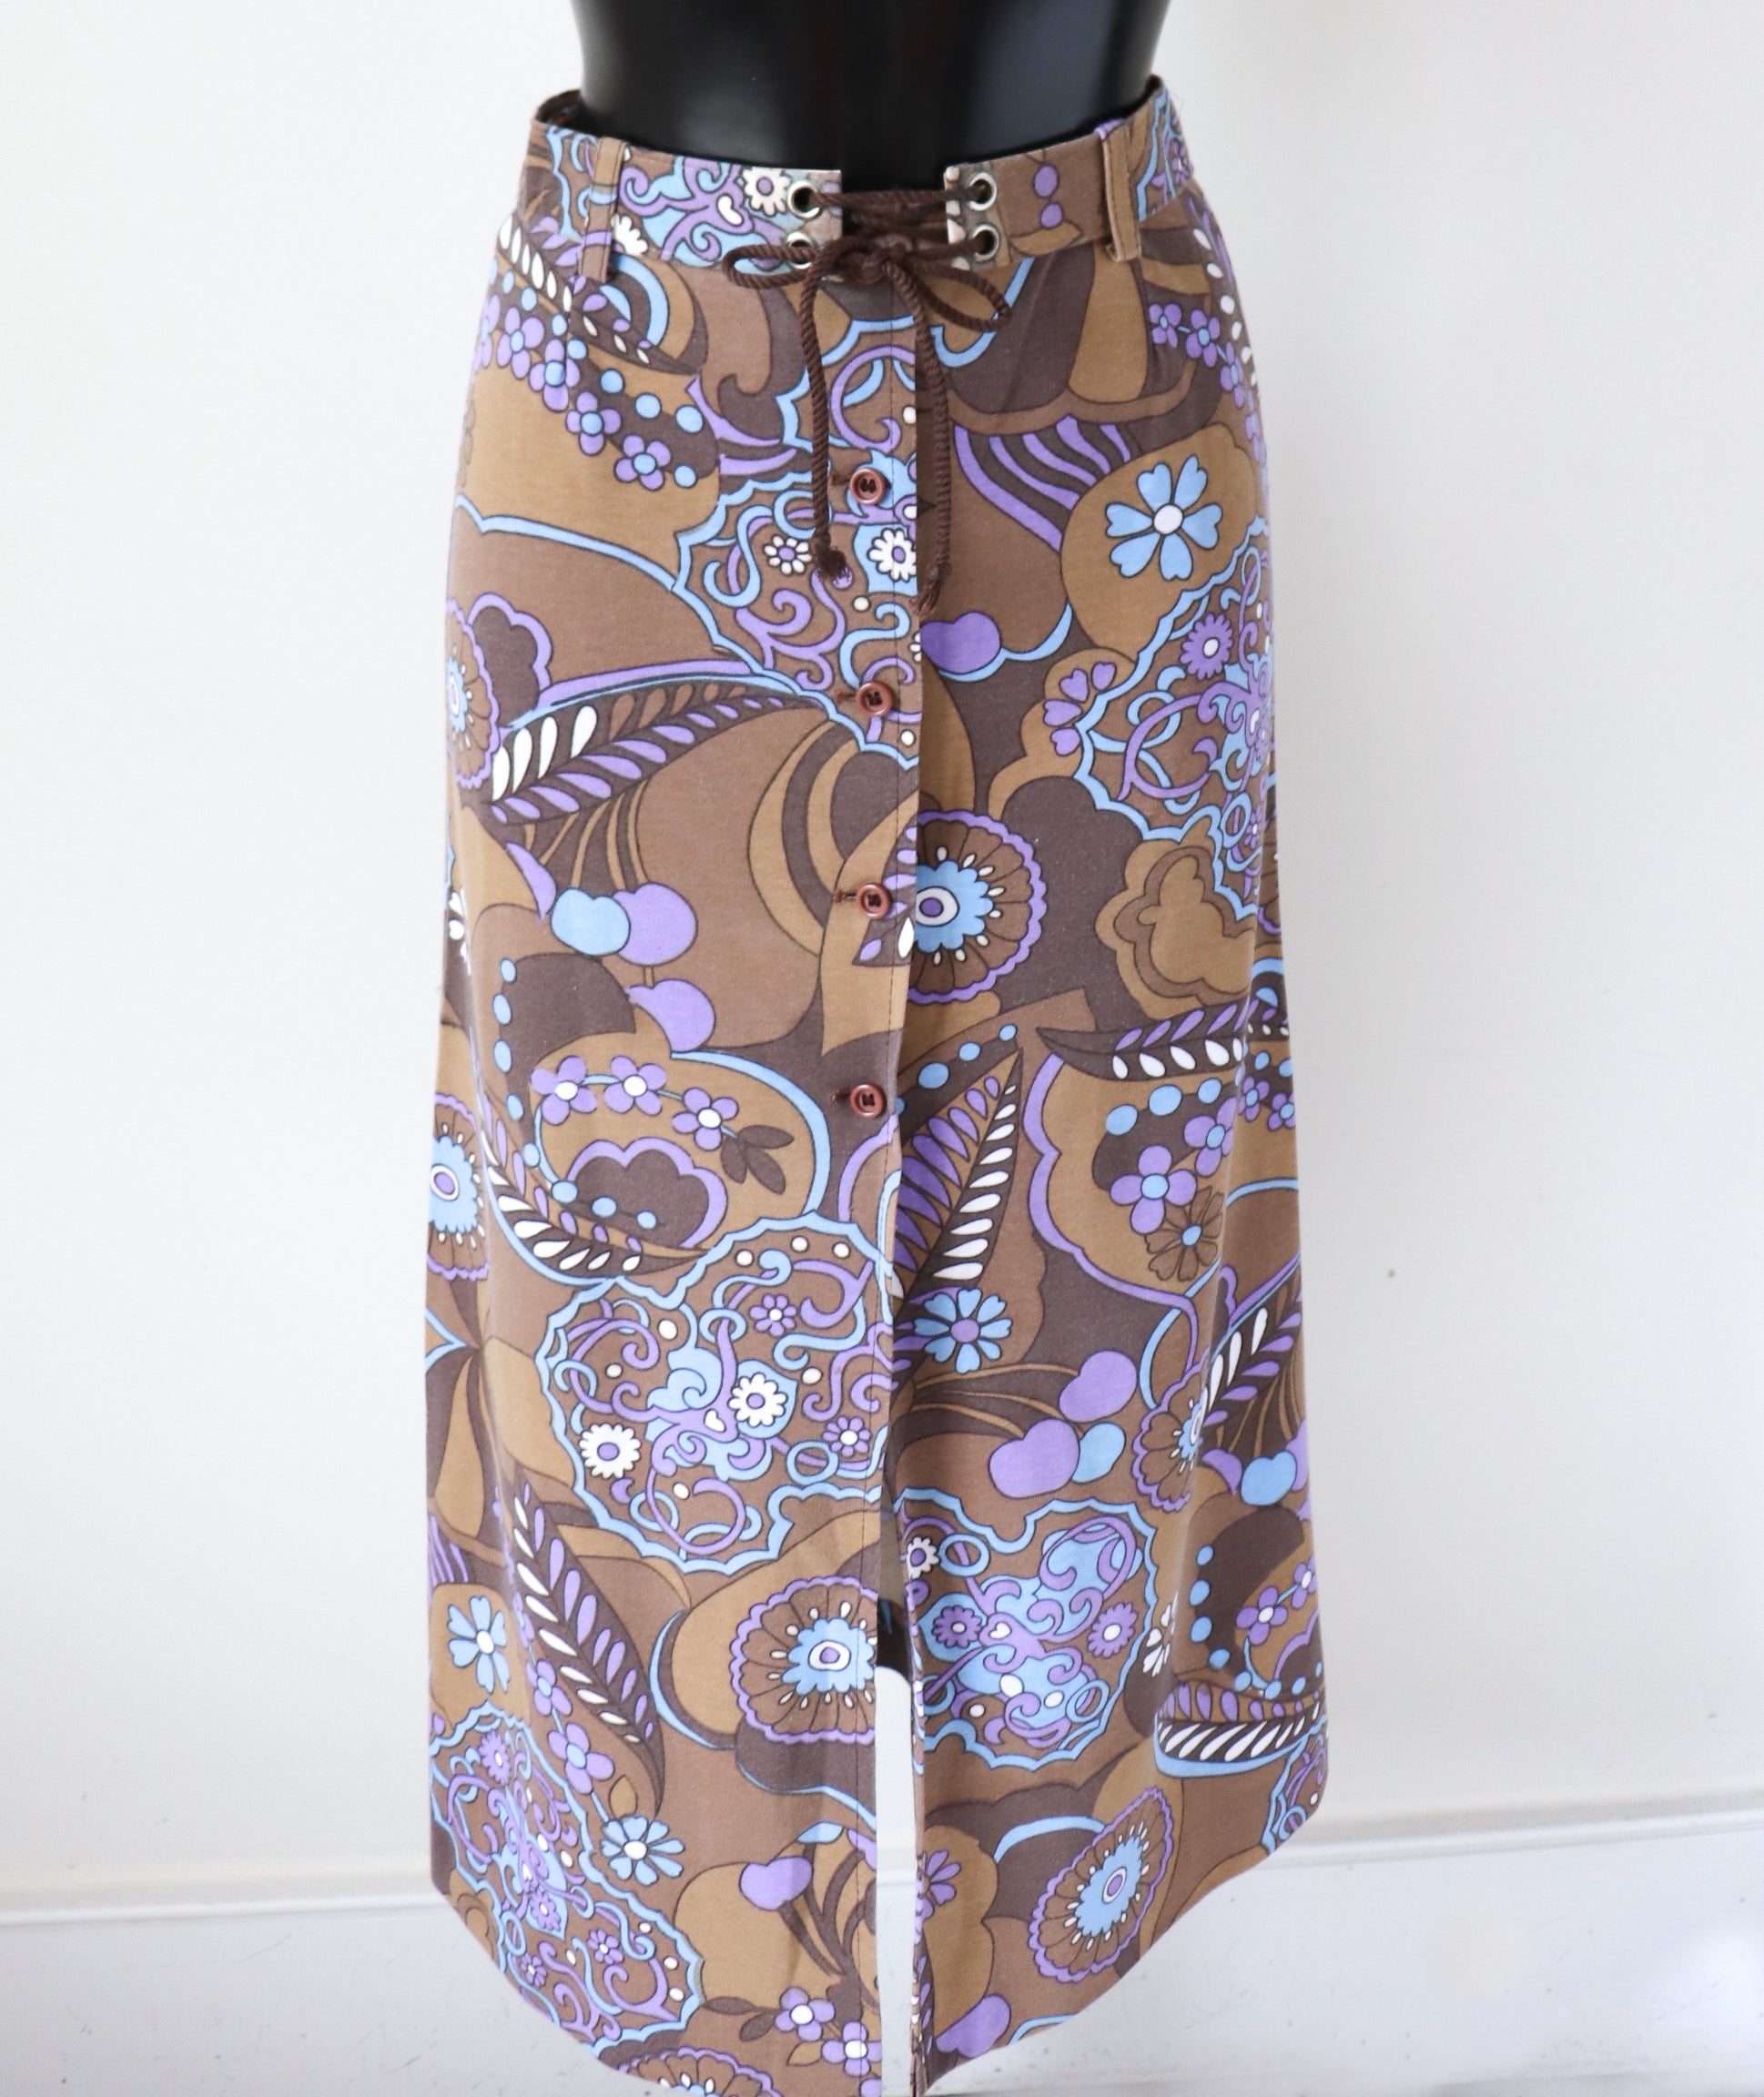 1960s Belted Midi Skirt (1 piece) - Psychedelic Go-Go - Fit XXS / UK 6